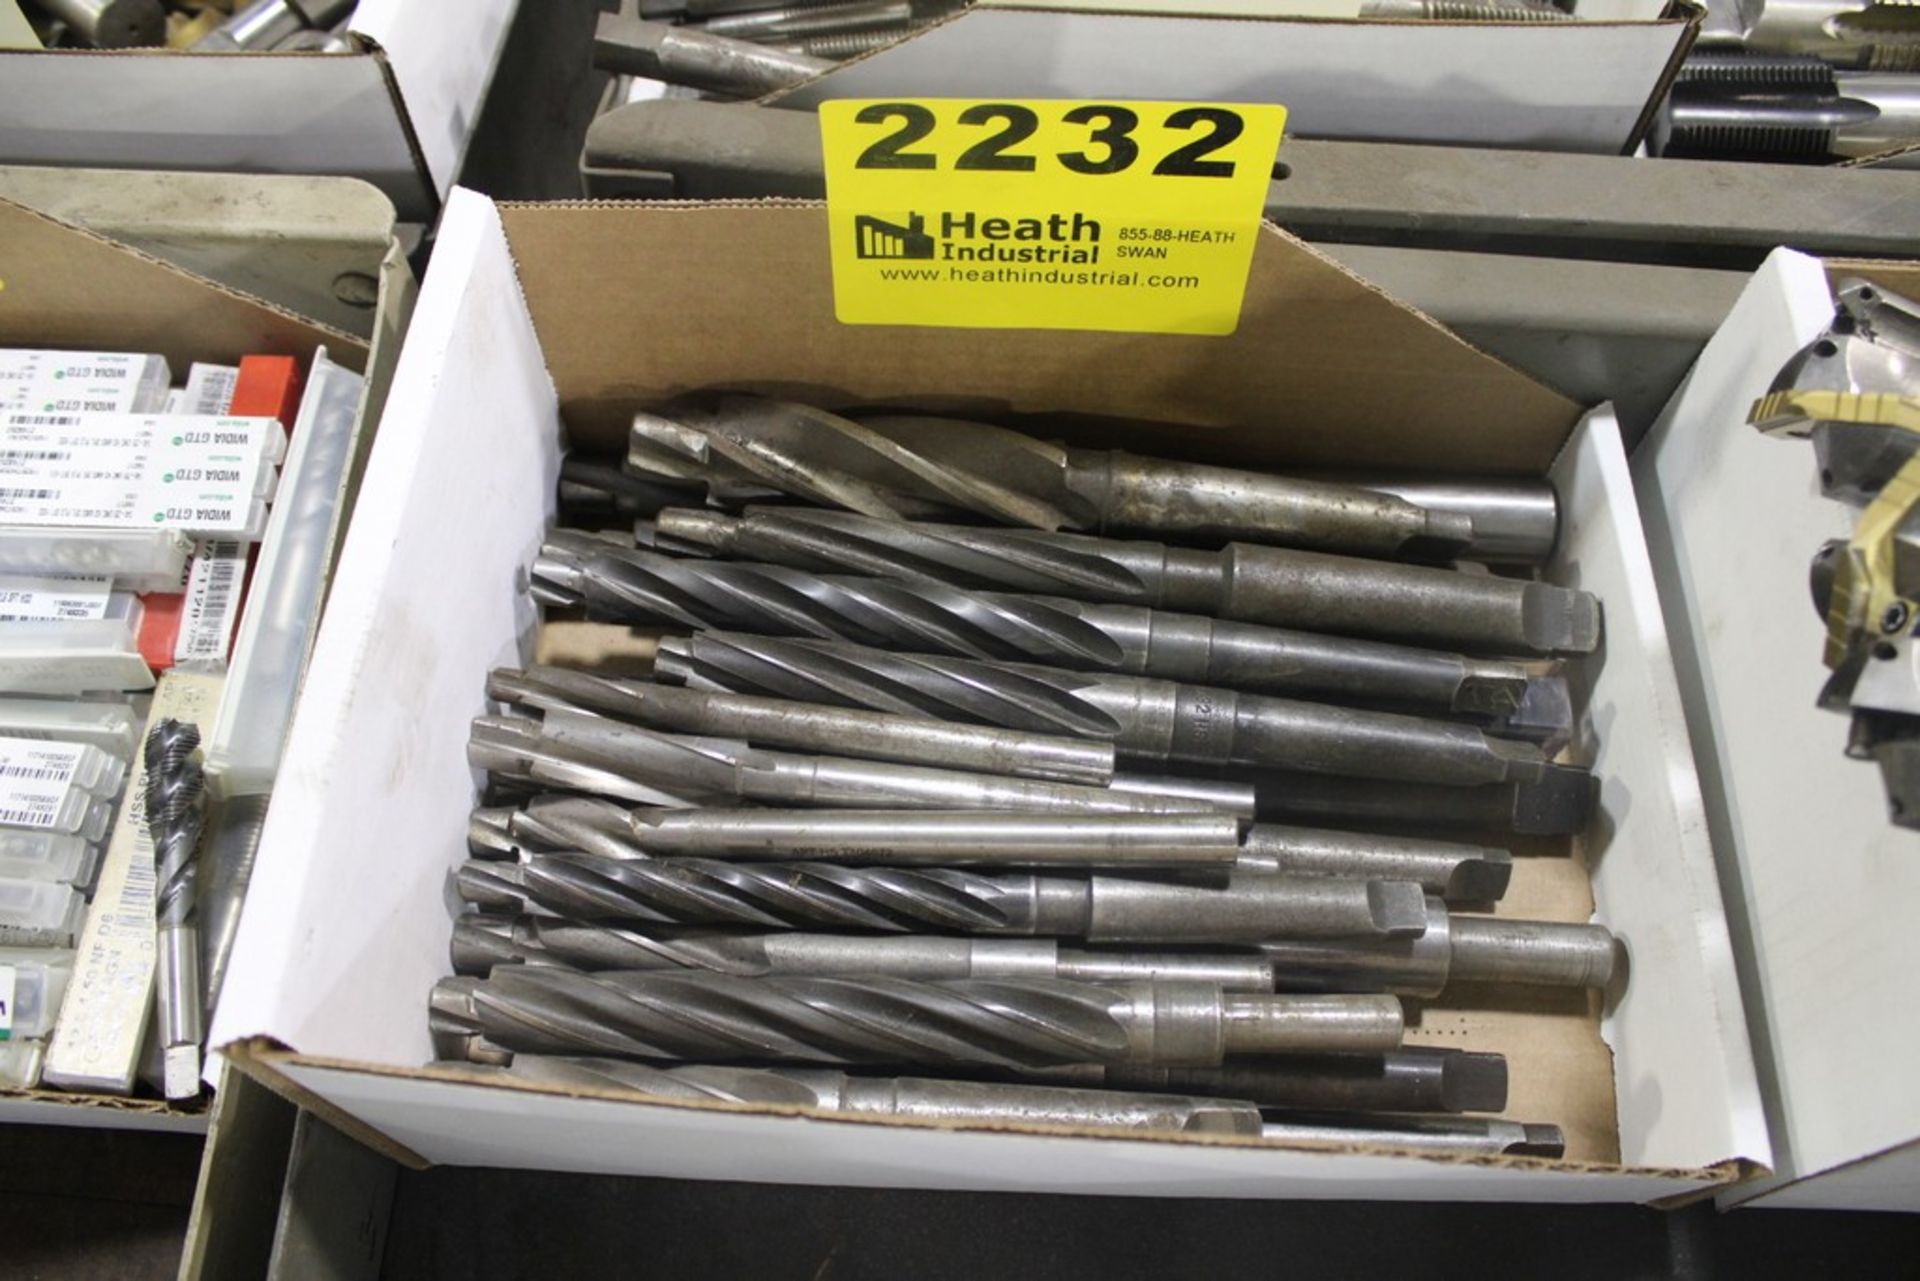 (20) ASSSORTED TAPER SHANK & STRAIGHT SHANK COUNTERBORES IN BOX